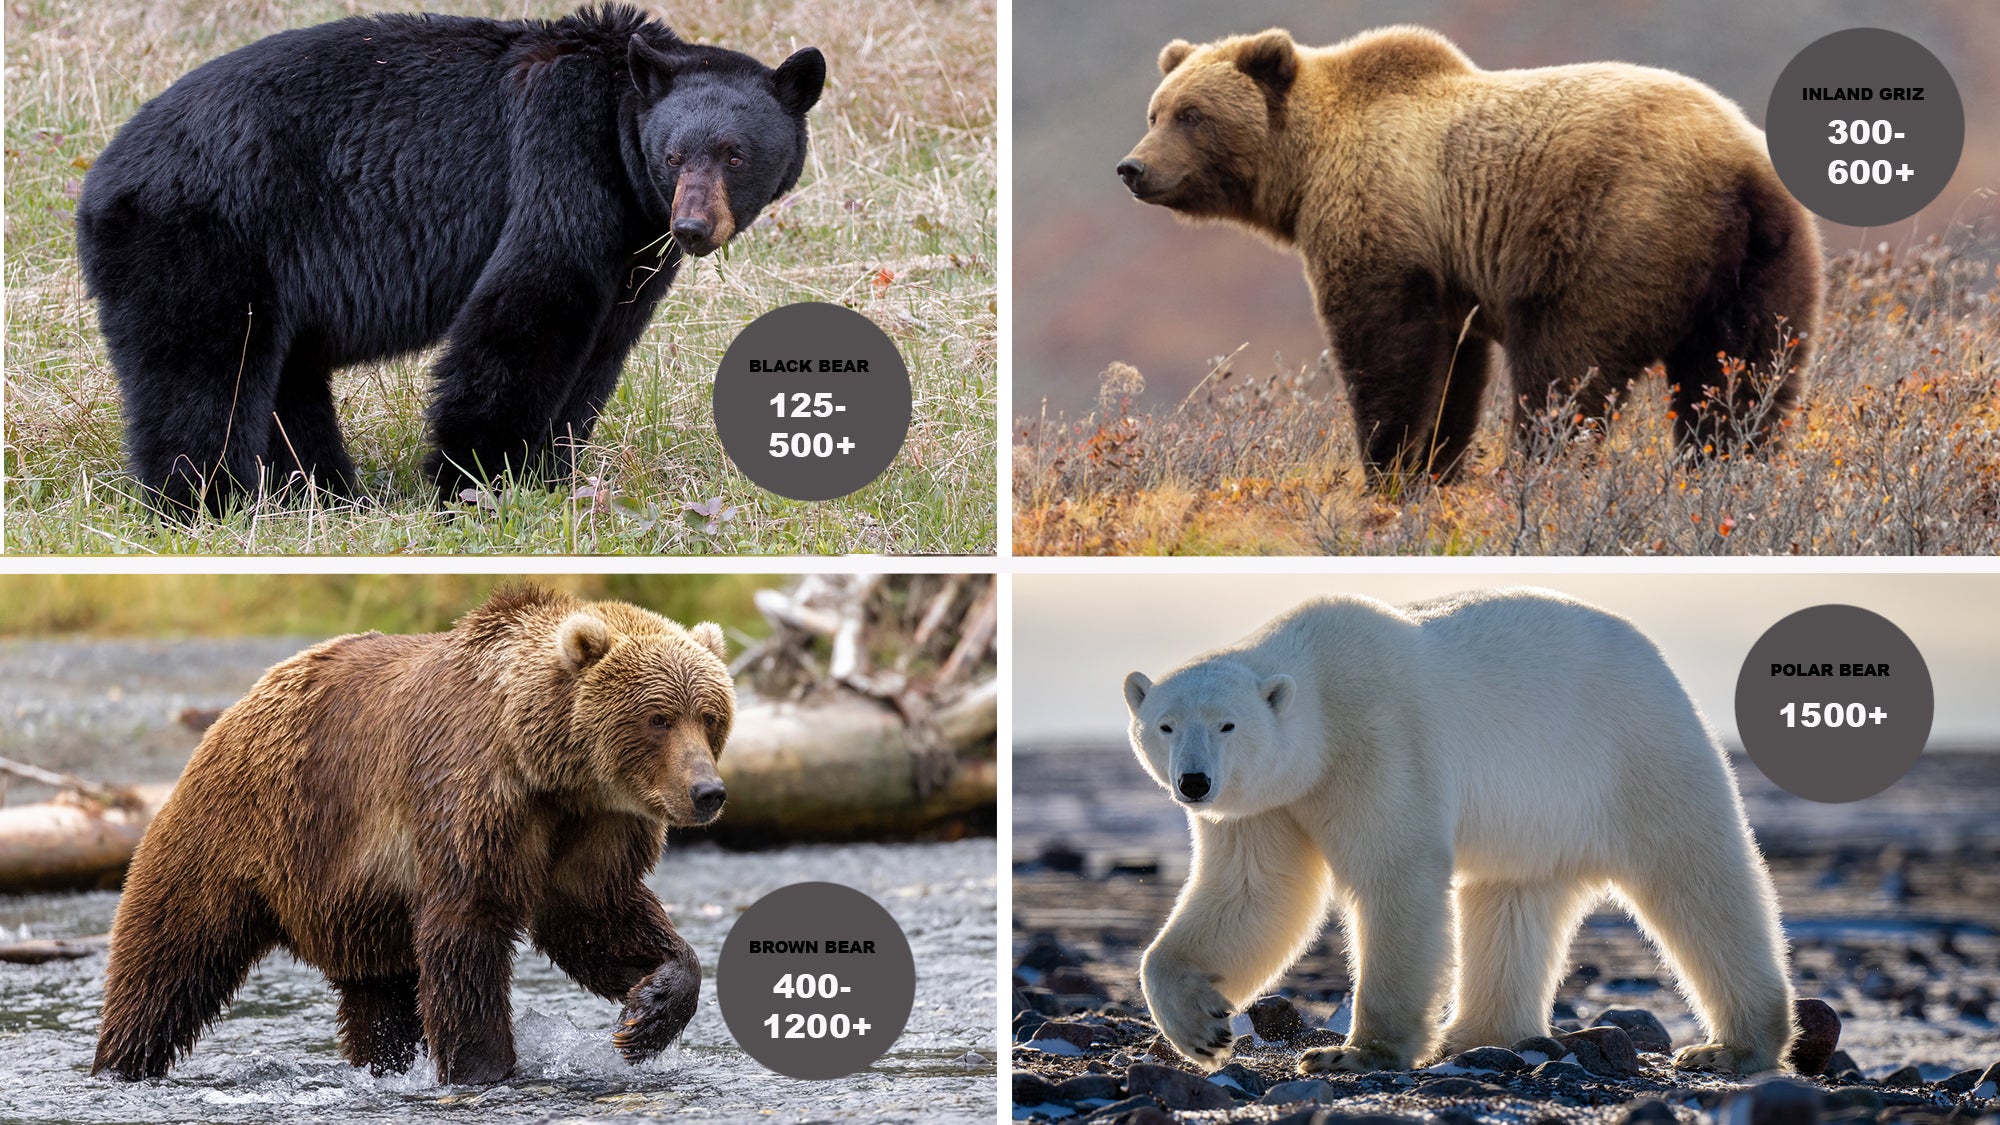 a graphic showing the weights of black bears, grizzly bears, brown bears, and polar bears